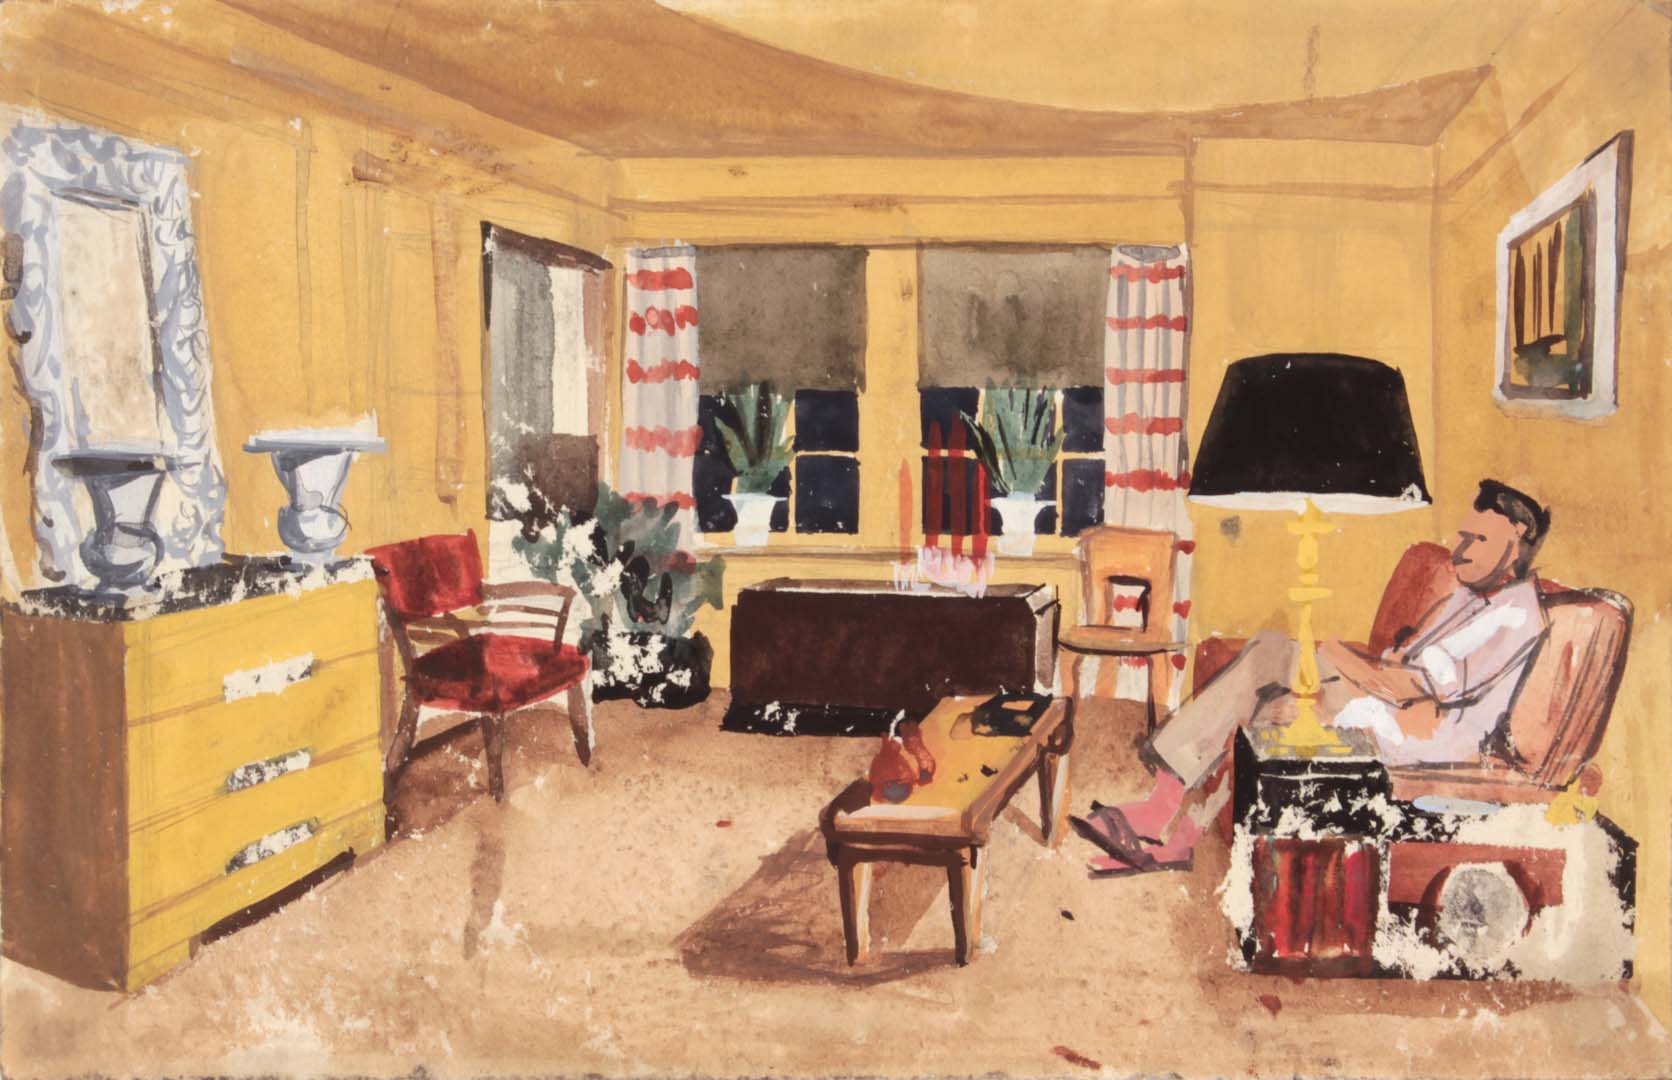 1949 NT (Dwelling Spaces Living Room 1 Striped Curtains) Casein and Graphite on Paper 7.375 x 11.50